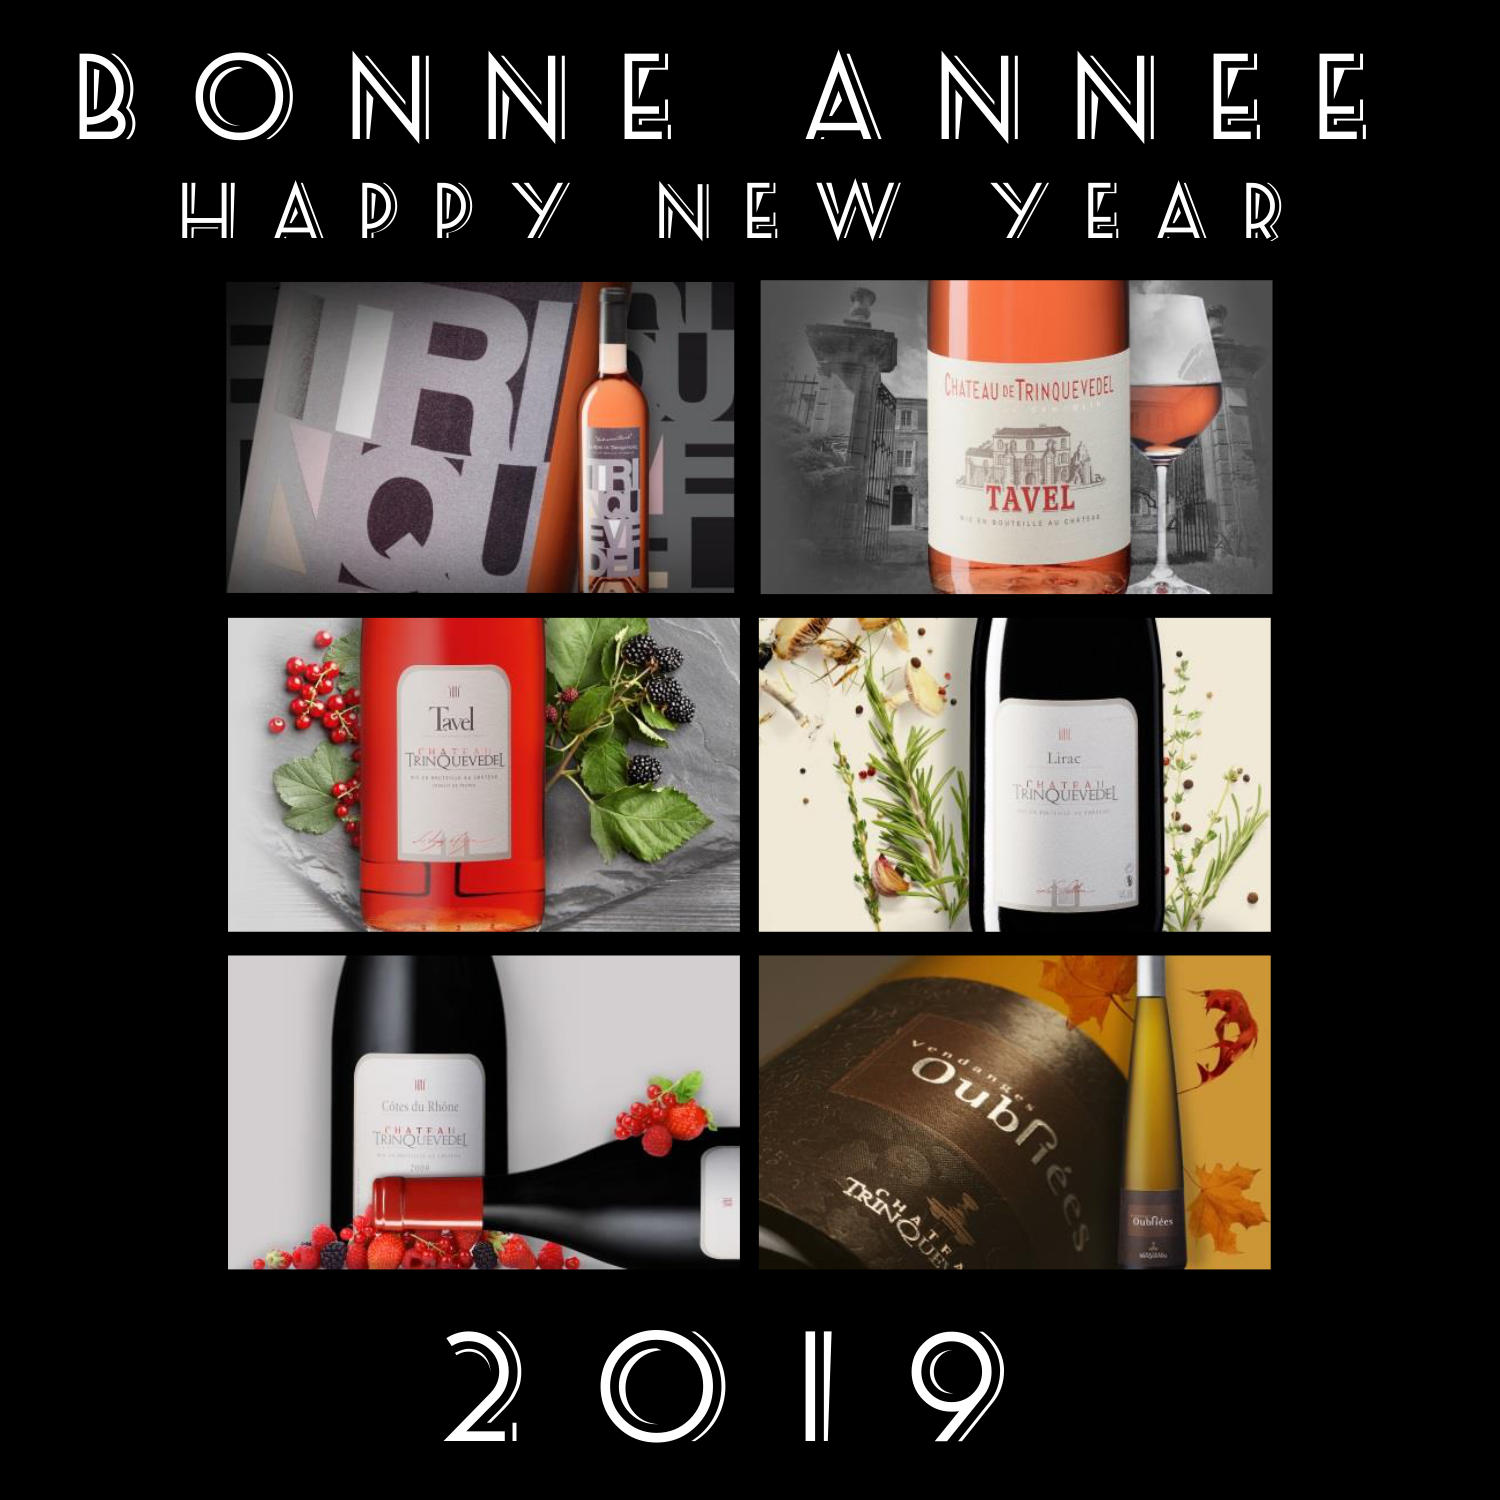 All our best wishes for 2019 !!